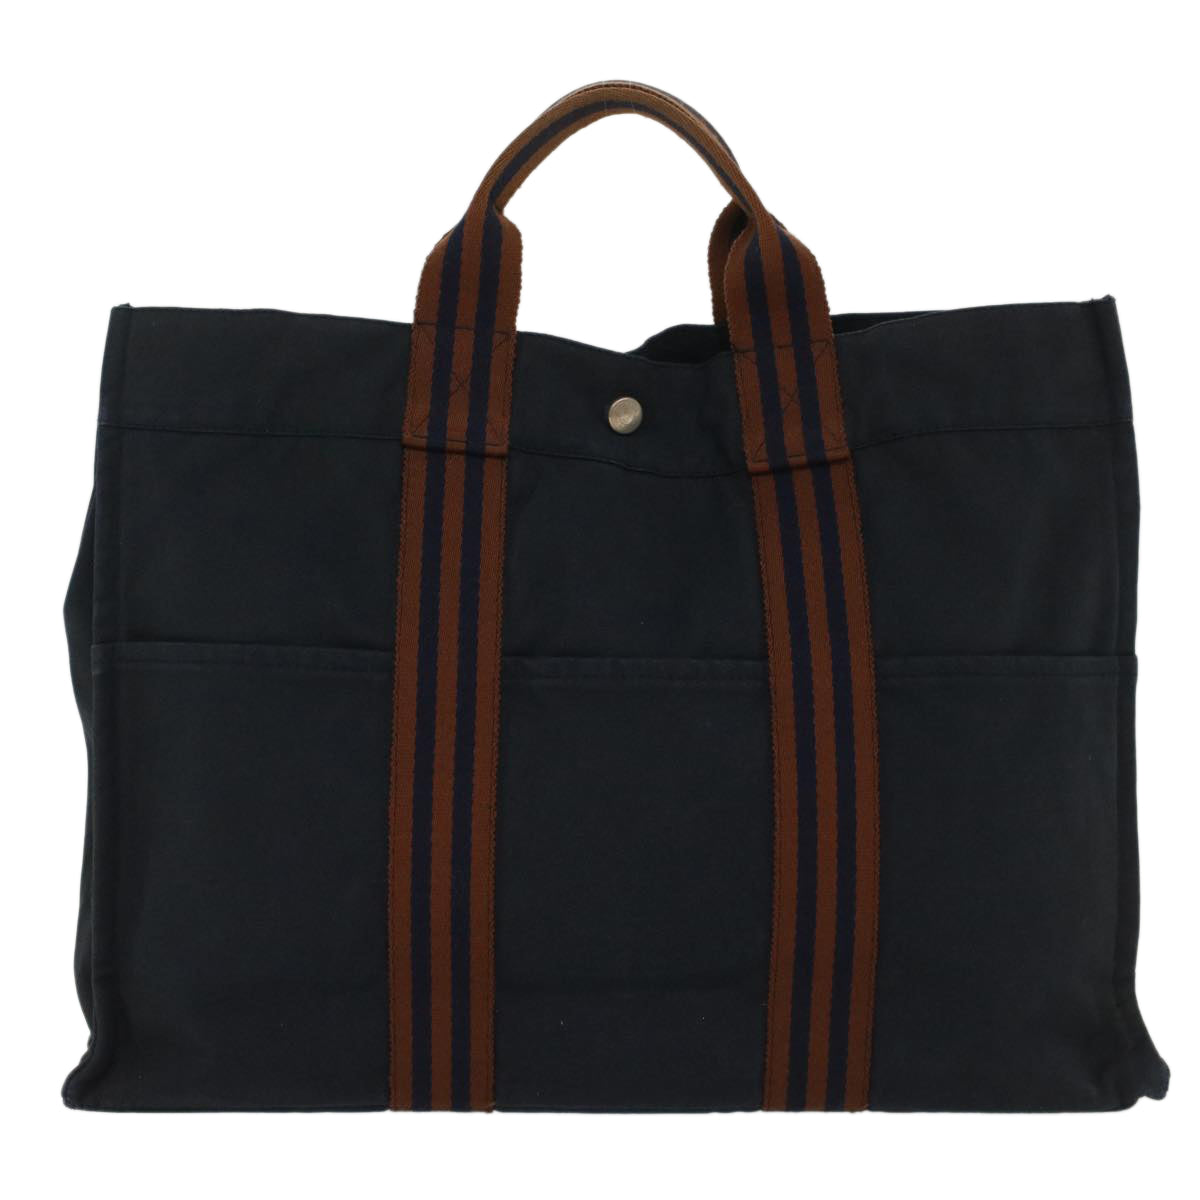 HERMES Fourre Tout MM Tote Bag cotton Navy Brown Auth 51876